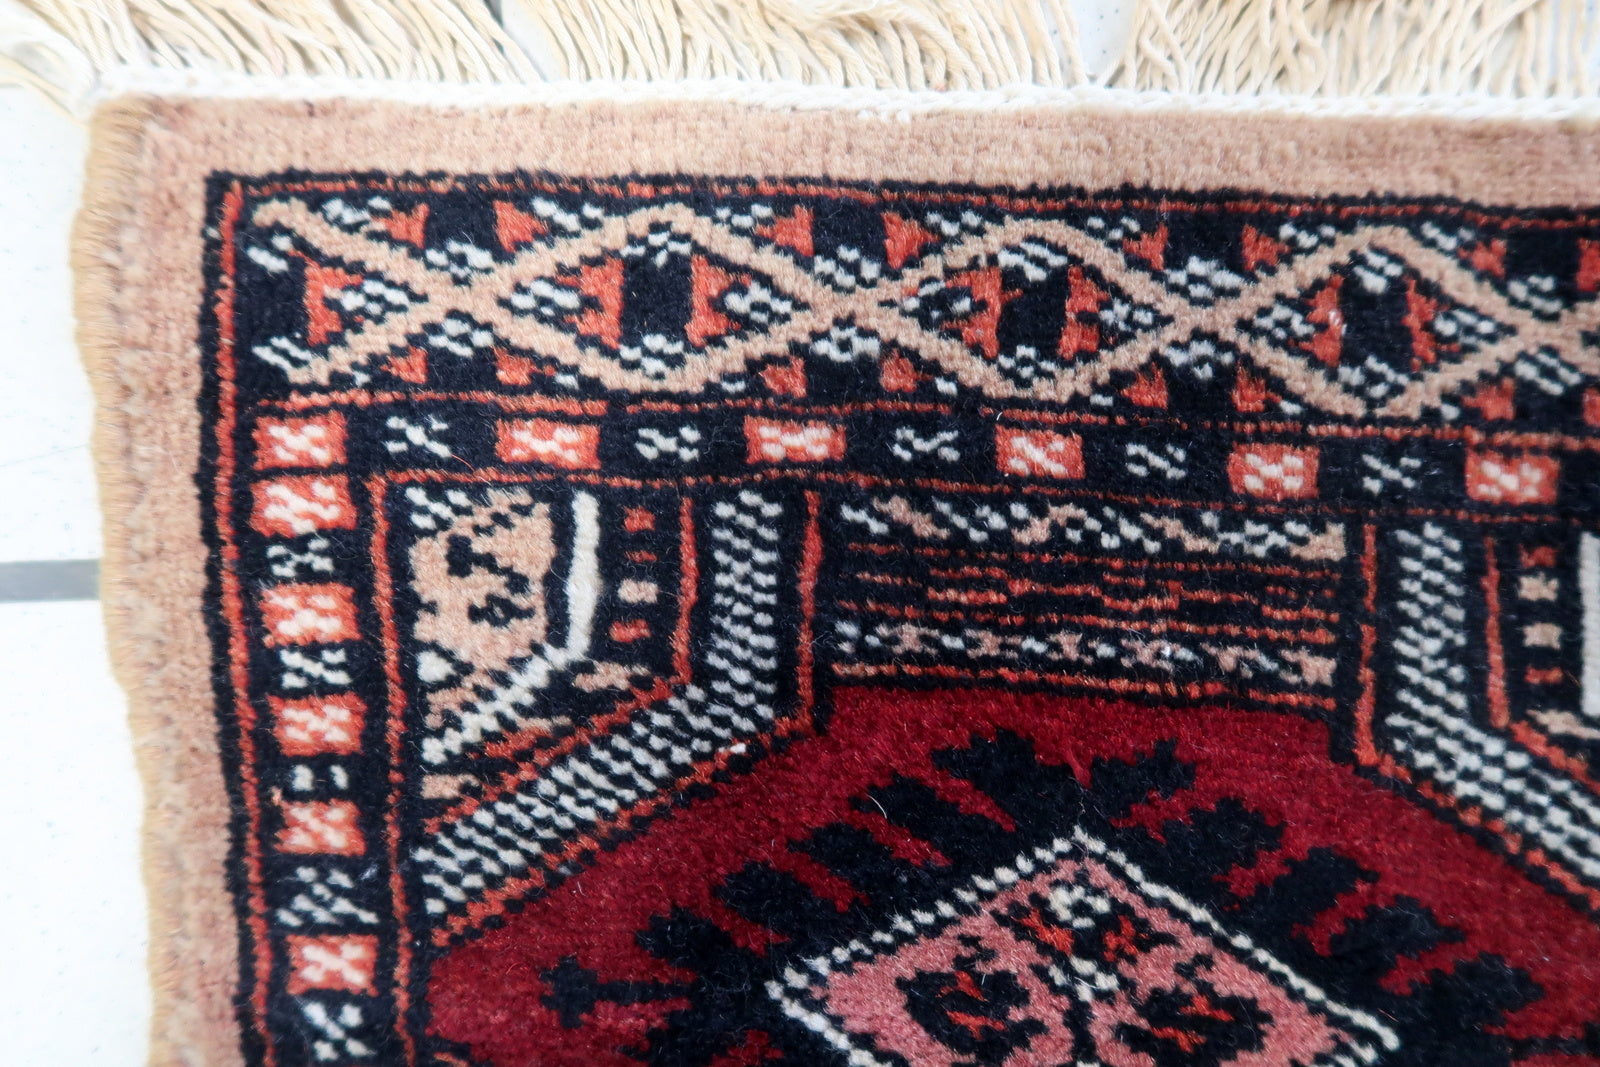 Close-up of the geometric and symmetrical motifs woven into the fabric of the mat rug